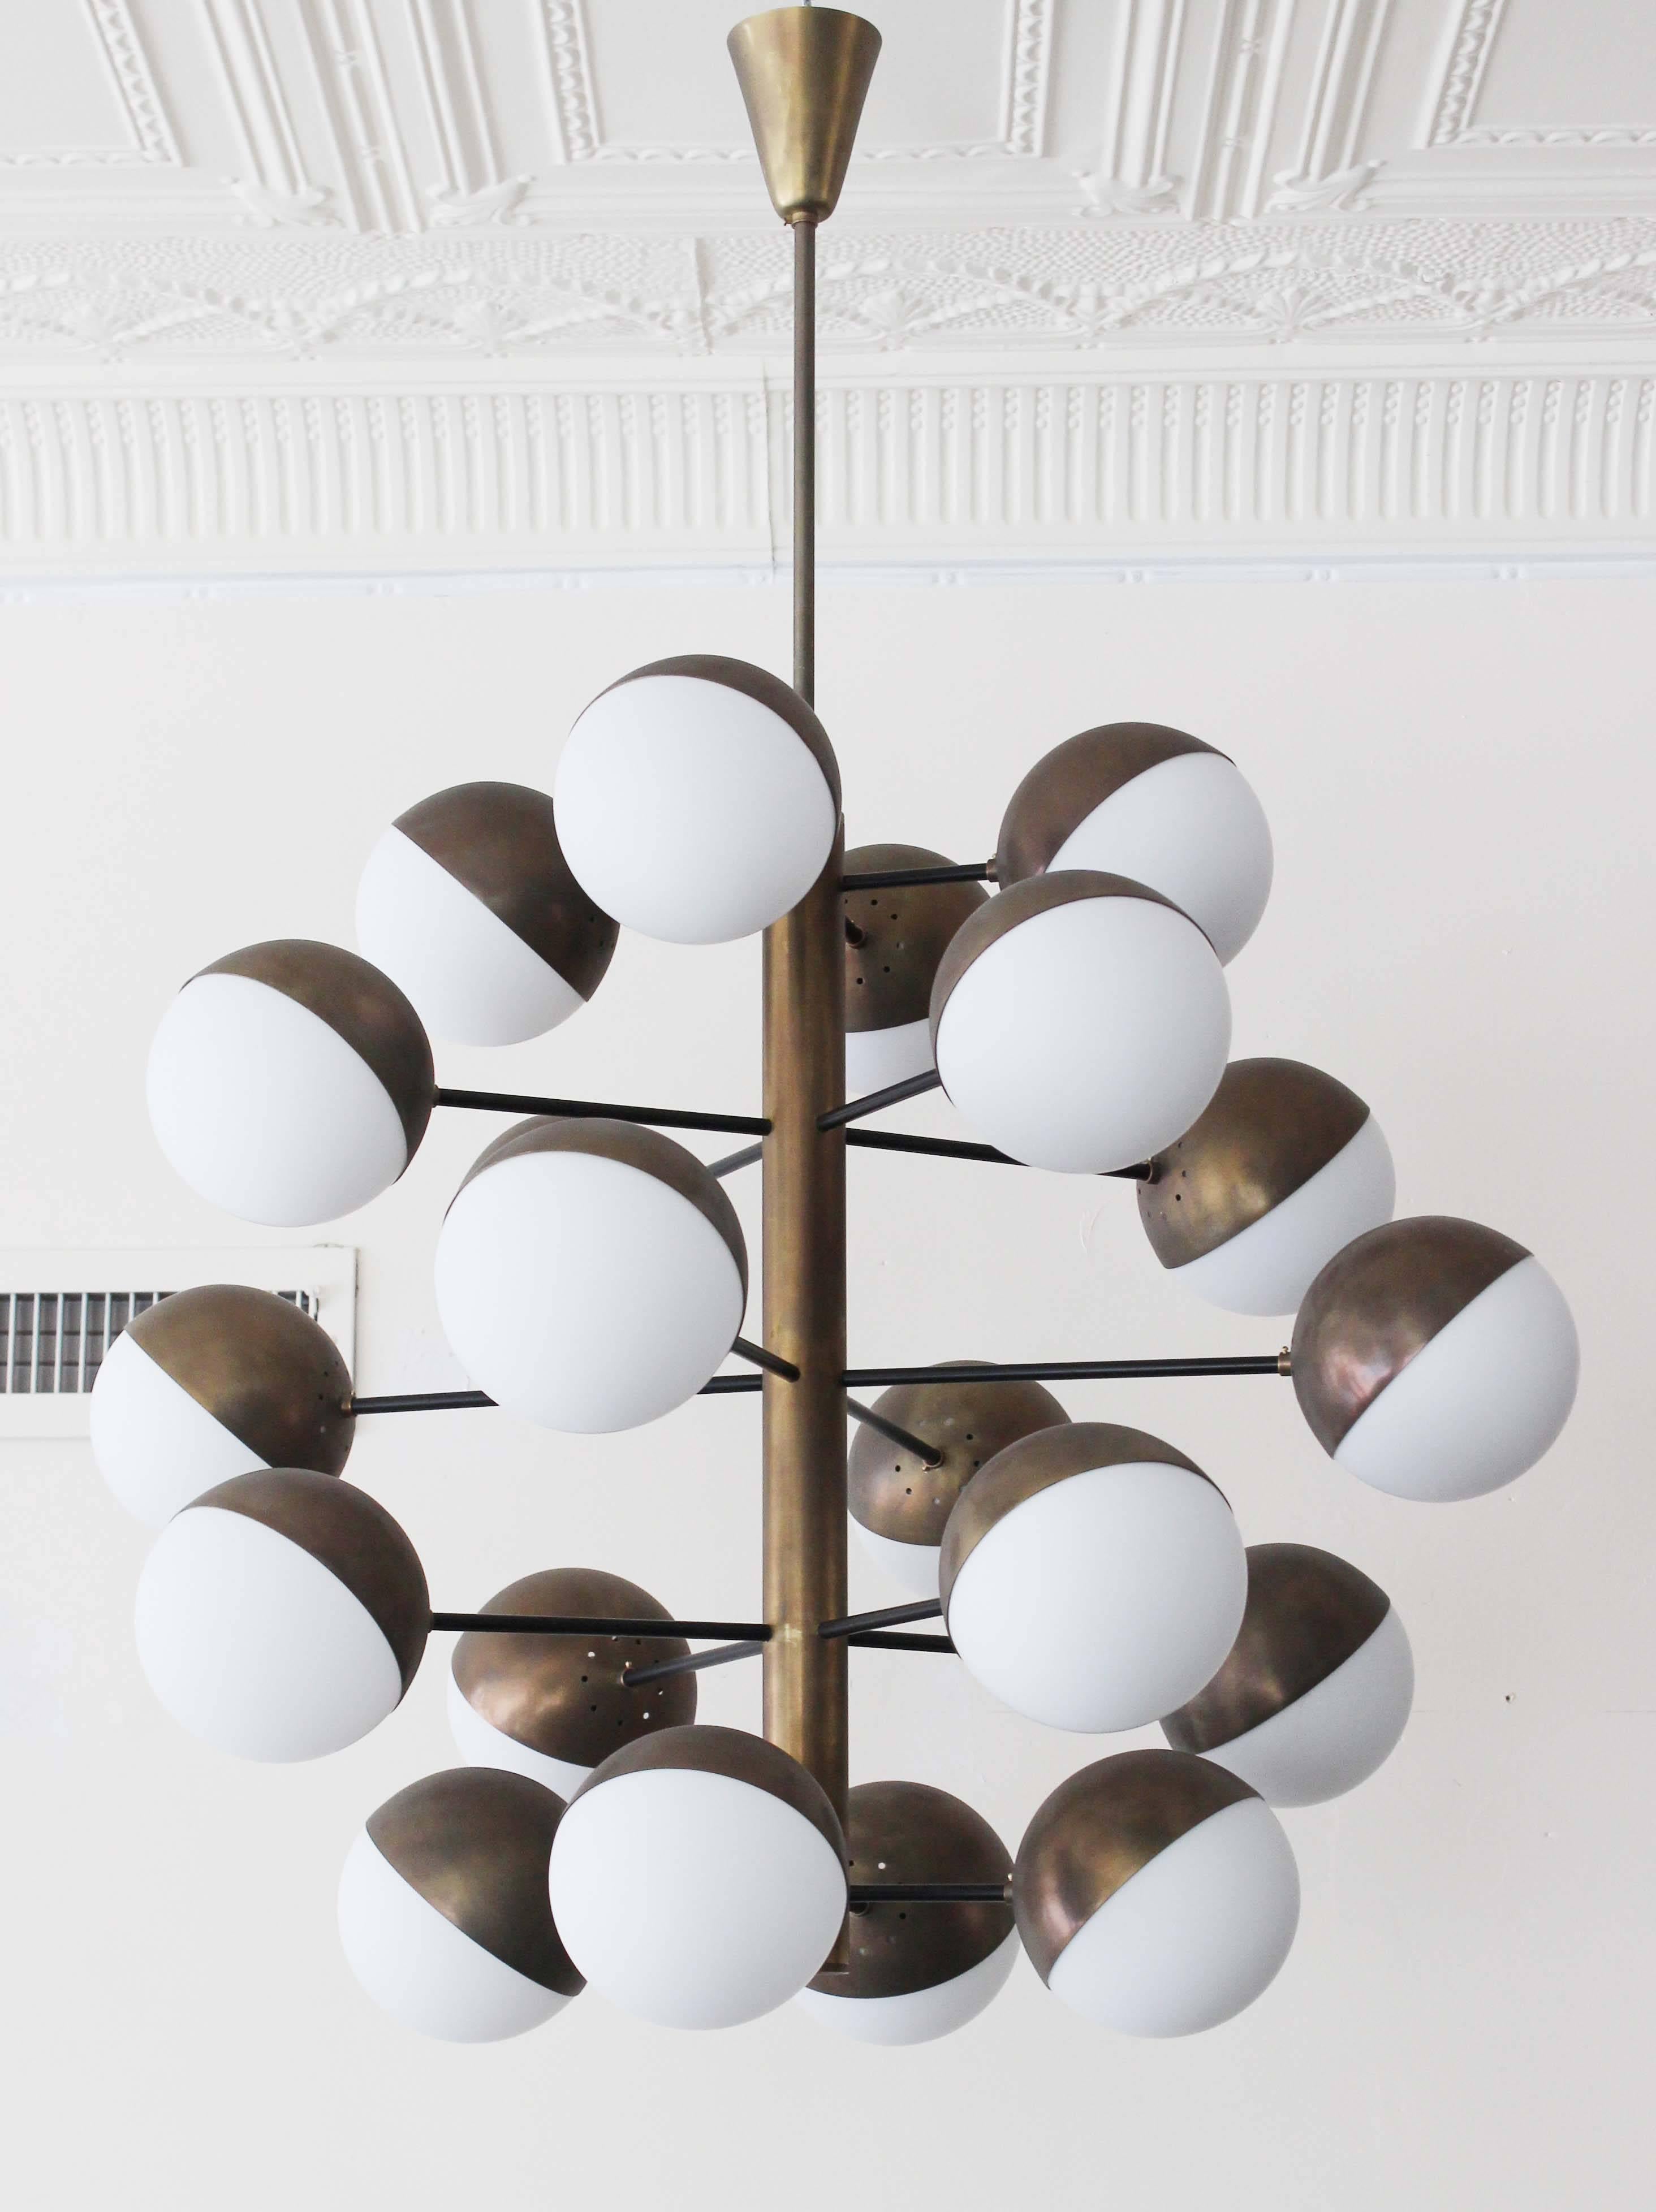 A magnificent bronzed metal 20 globe stem Stilnovo style chandelier with milk glass.

Measures: 6" diameter globes.
Stem and ceiling cap 18" (incl 5" cap).
 
